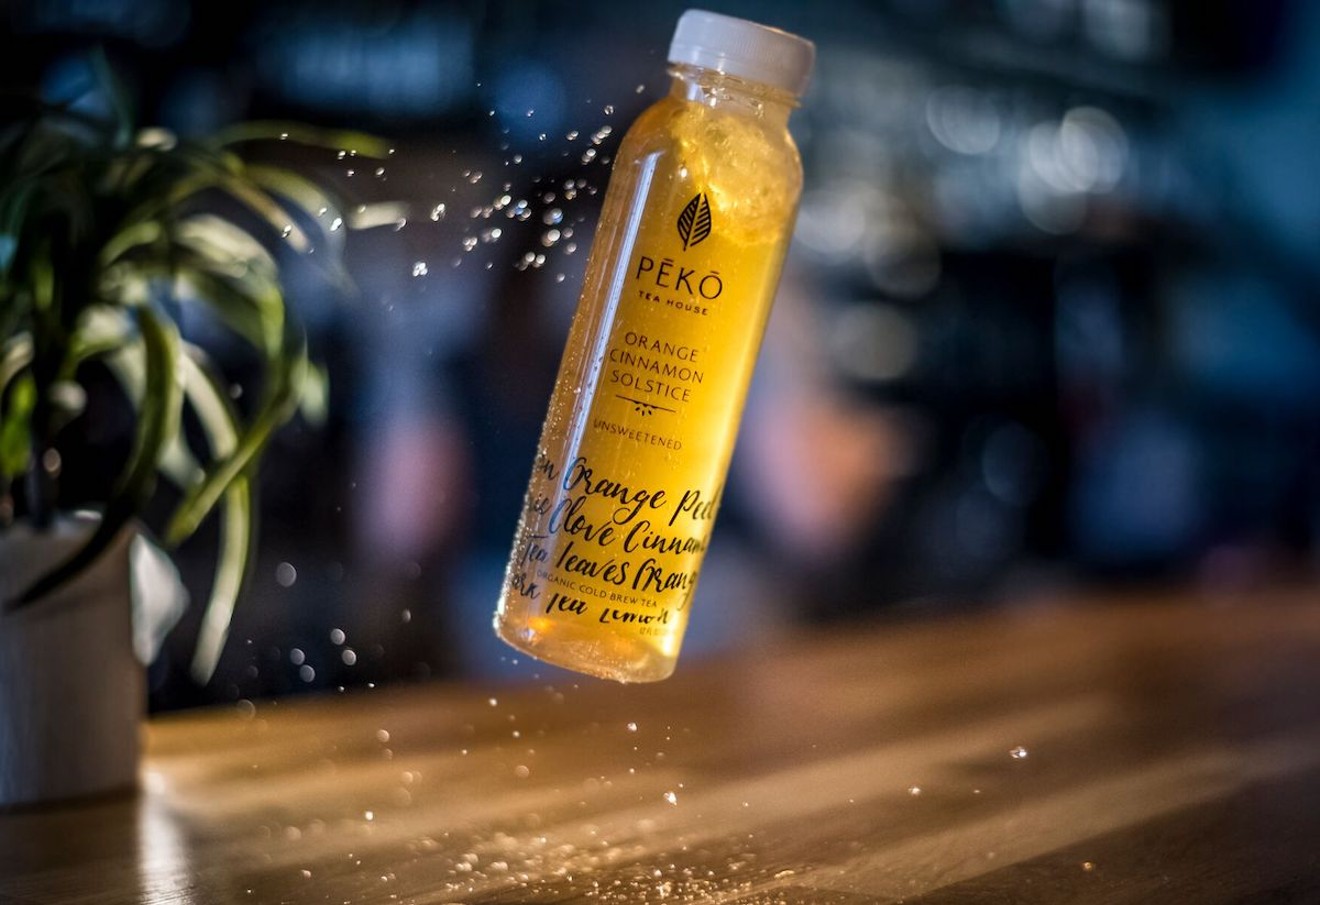 Peko Tea House is South Florida's first bottled cold-brewed tea.